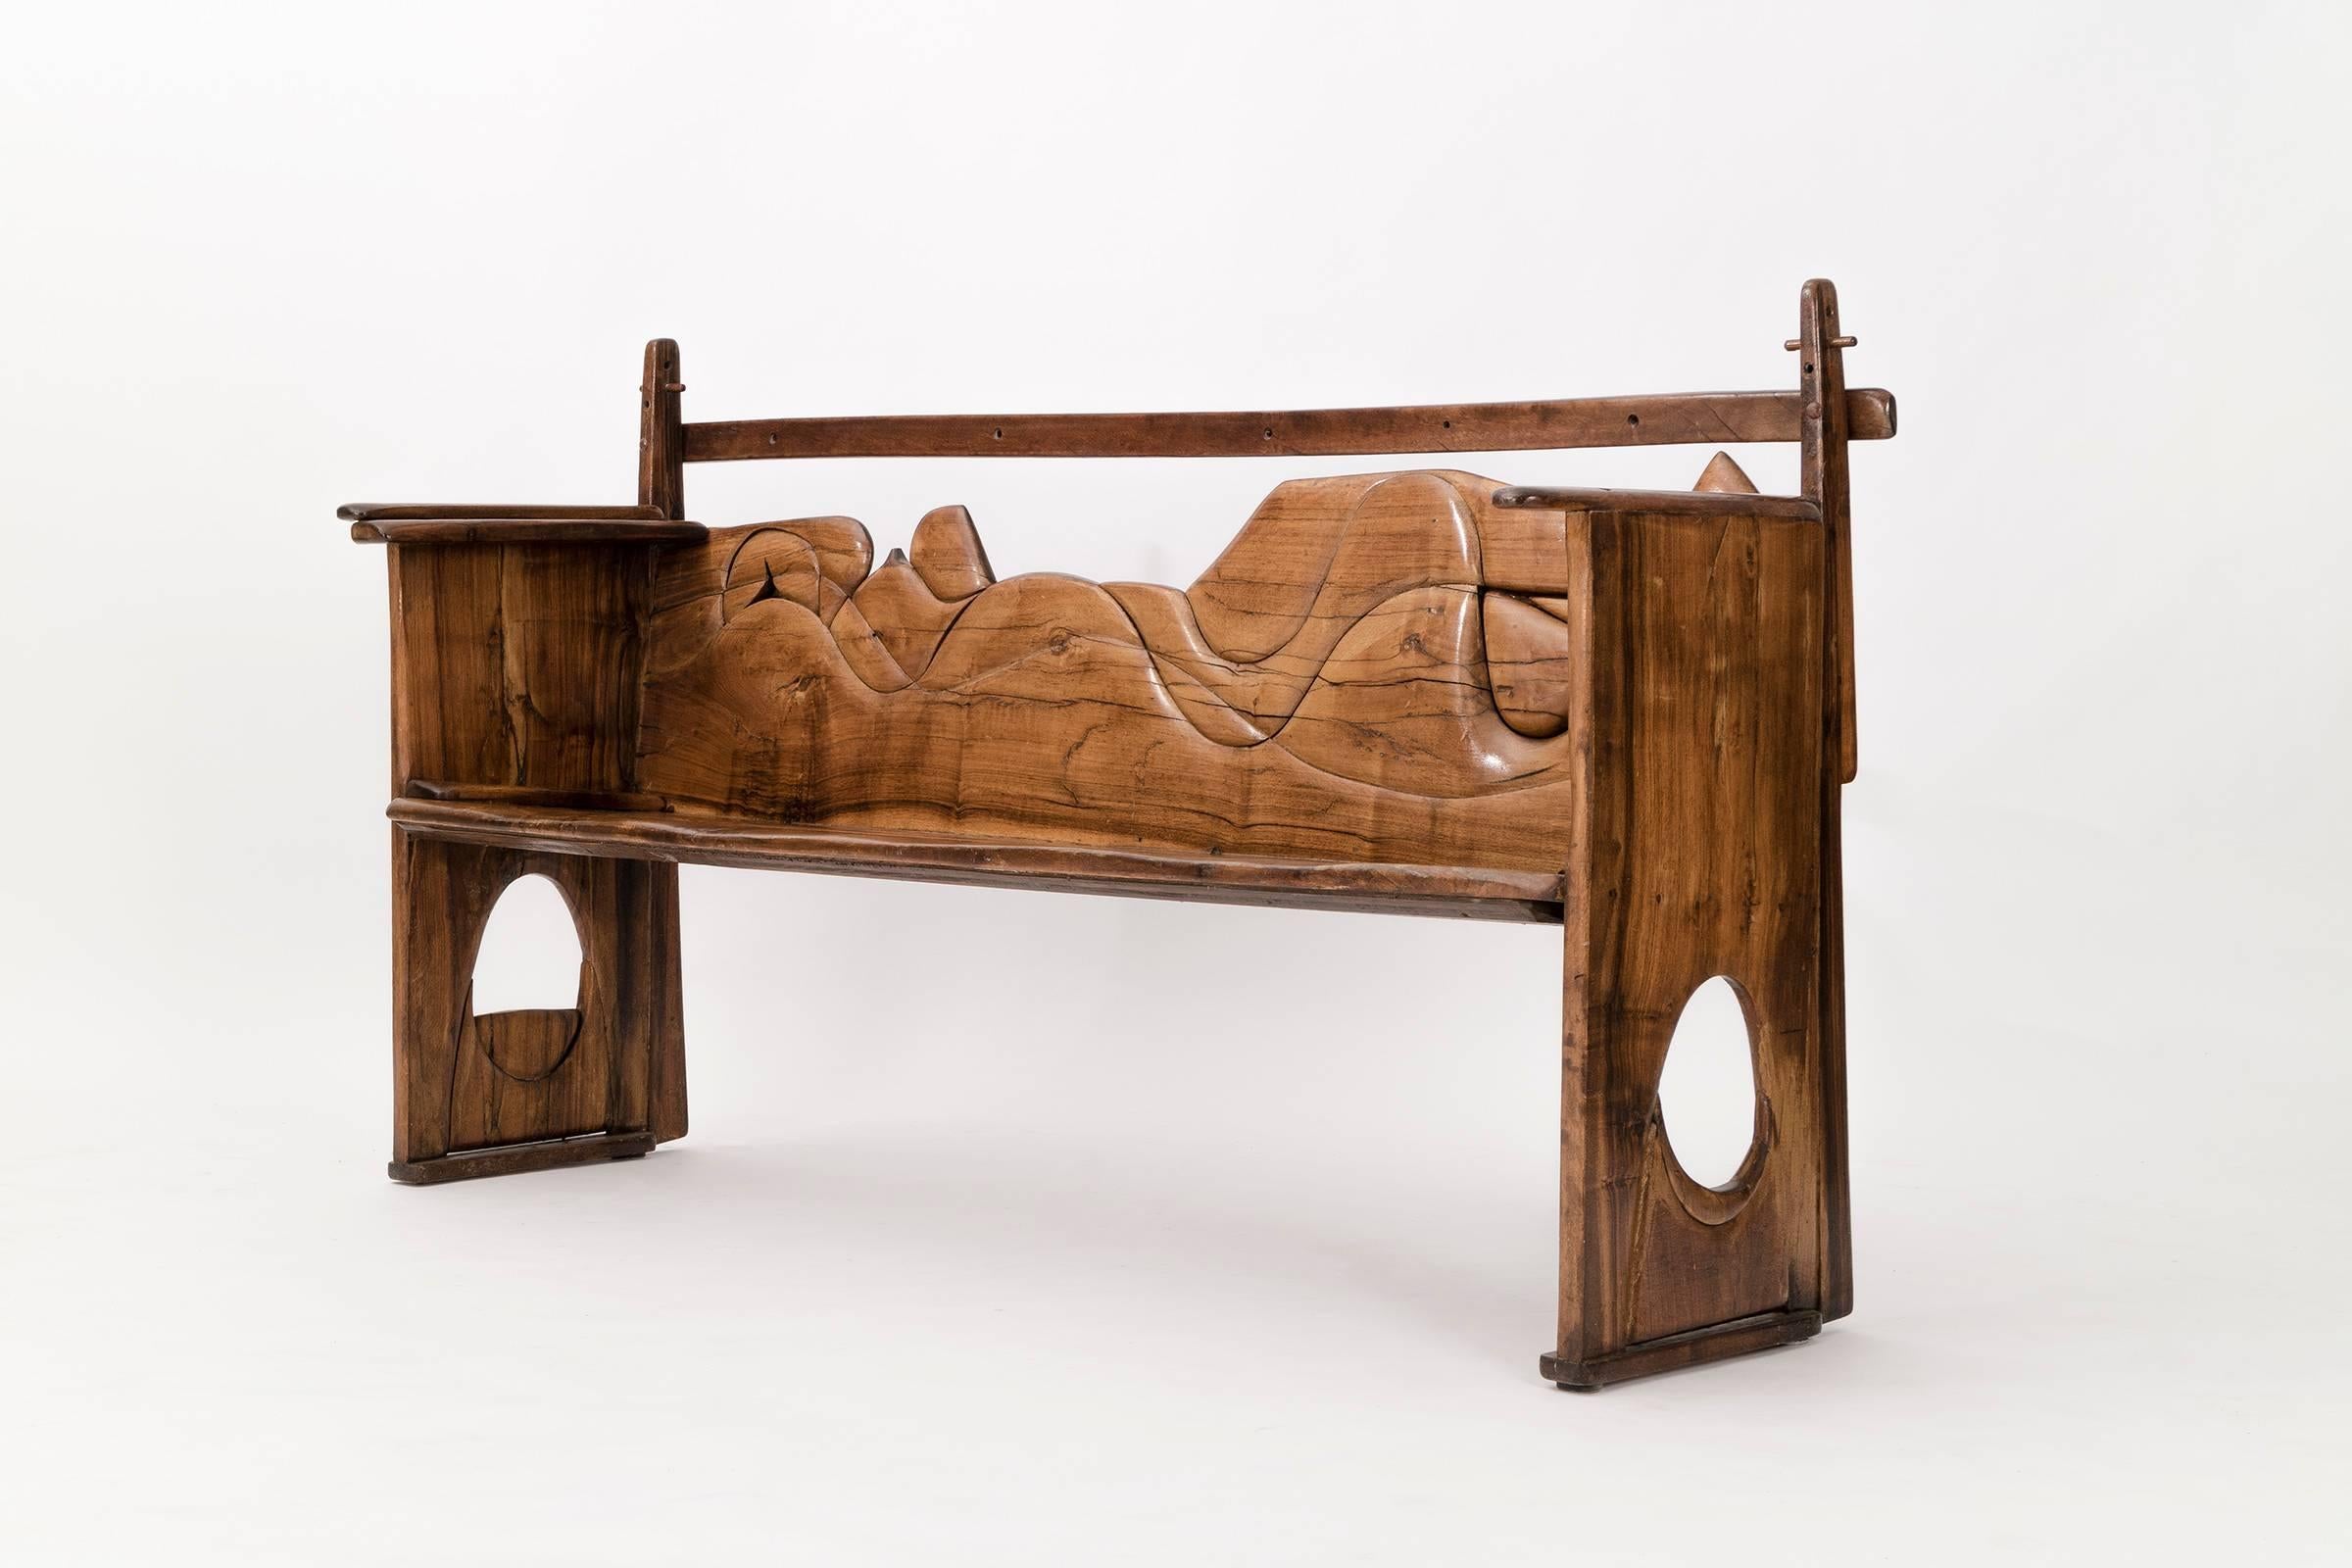 De Swart Bench-This bench made with walnut hand-carved by the Artist has many playful design details, the adjustable support bar in the back, arms with holes and round cutouts on sides makes this bench visually intriguing and esthetically